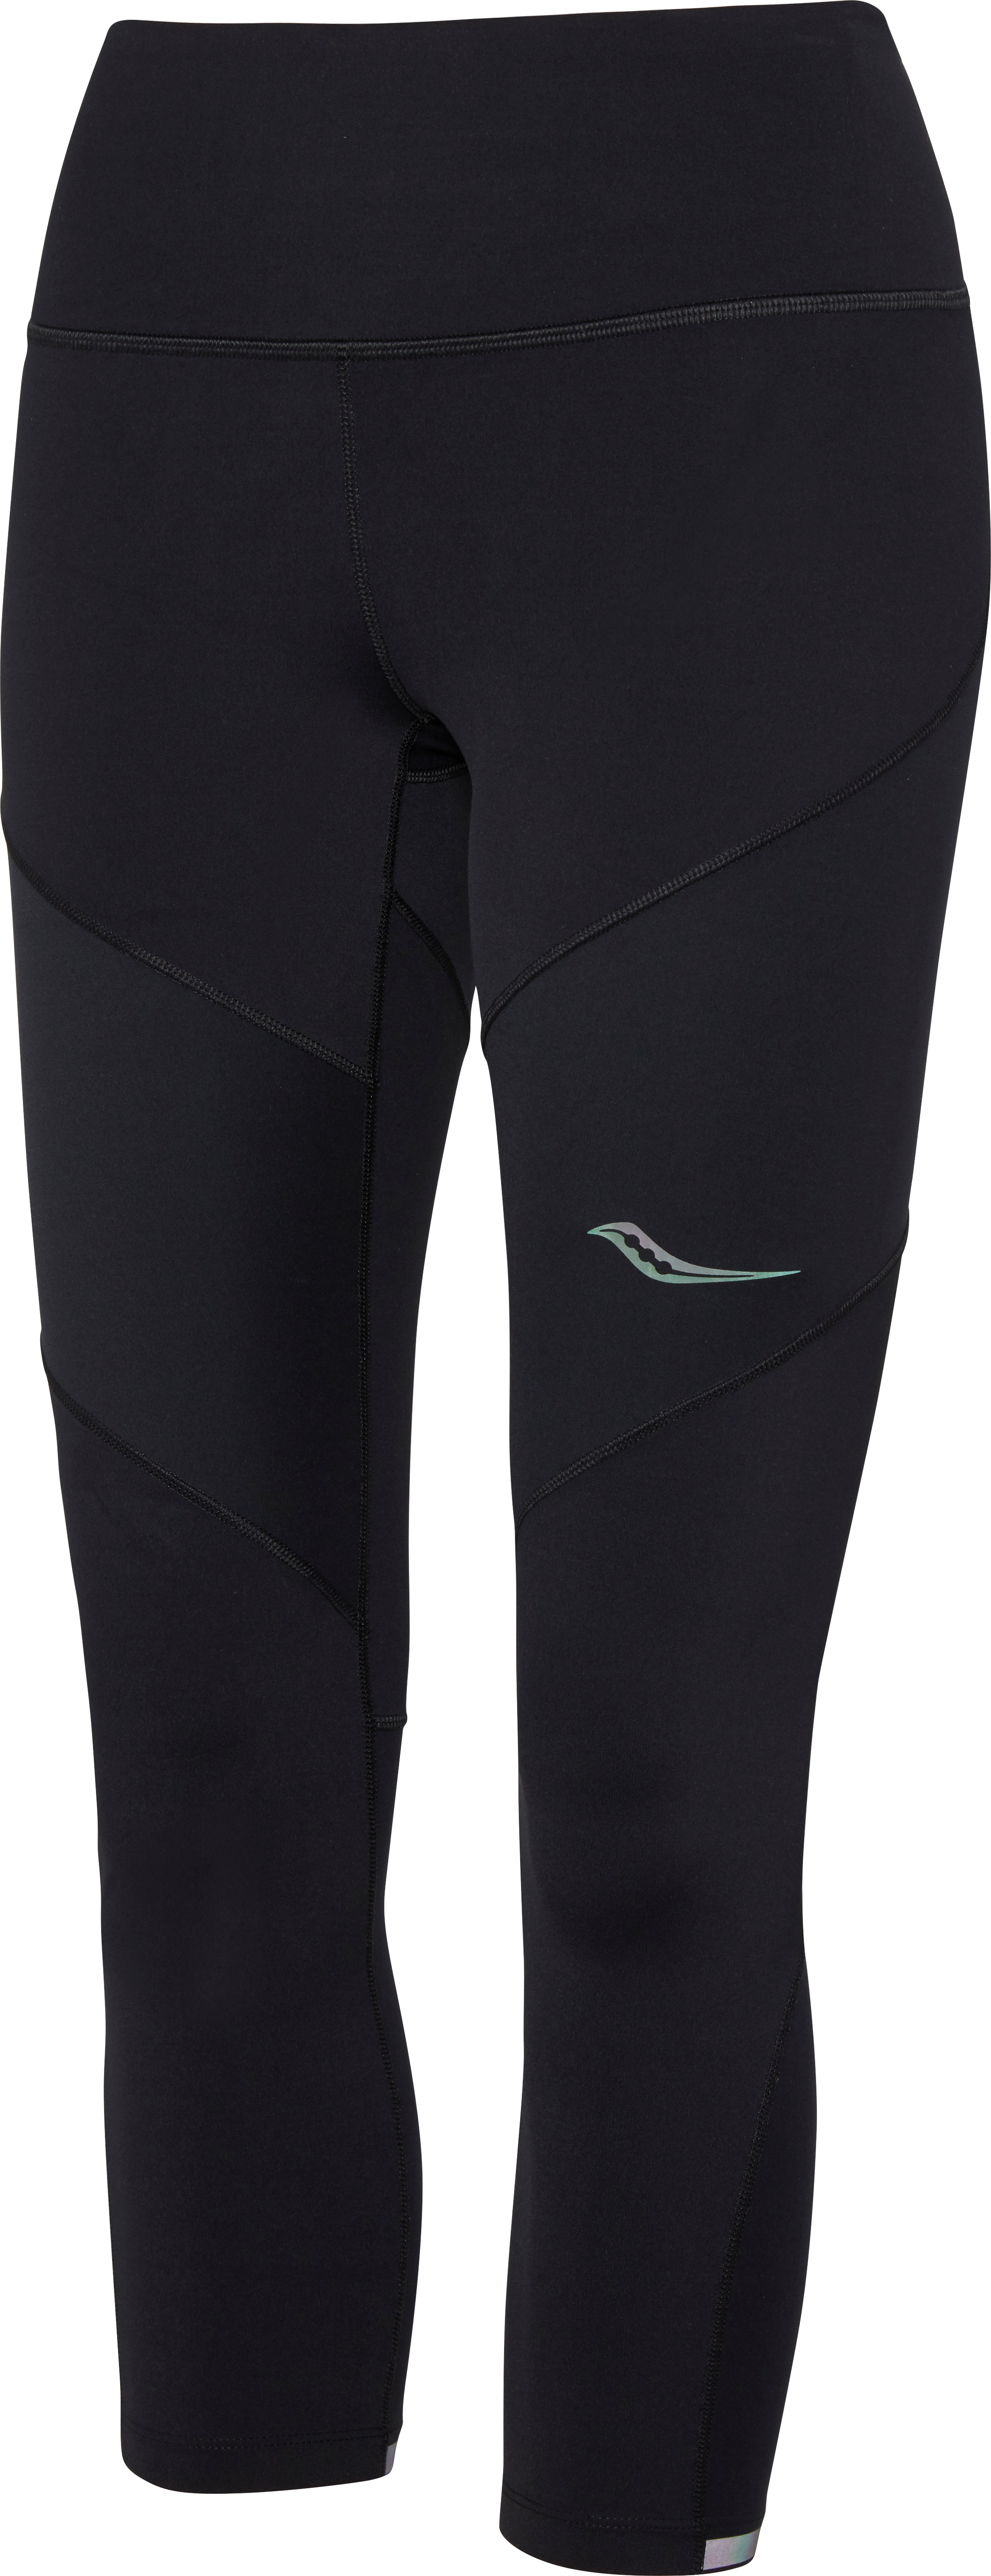 Women's Time Trial Crop Tight Black